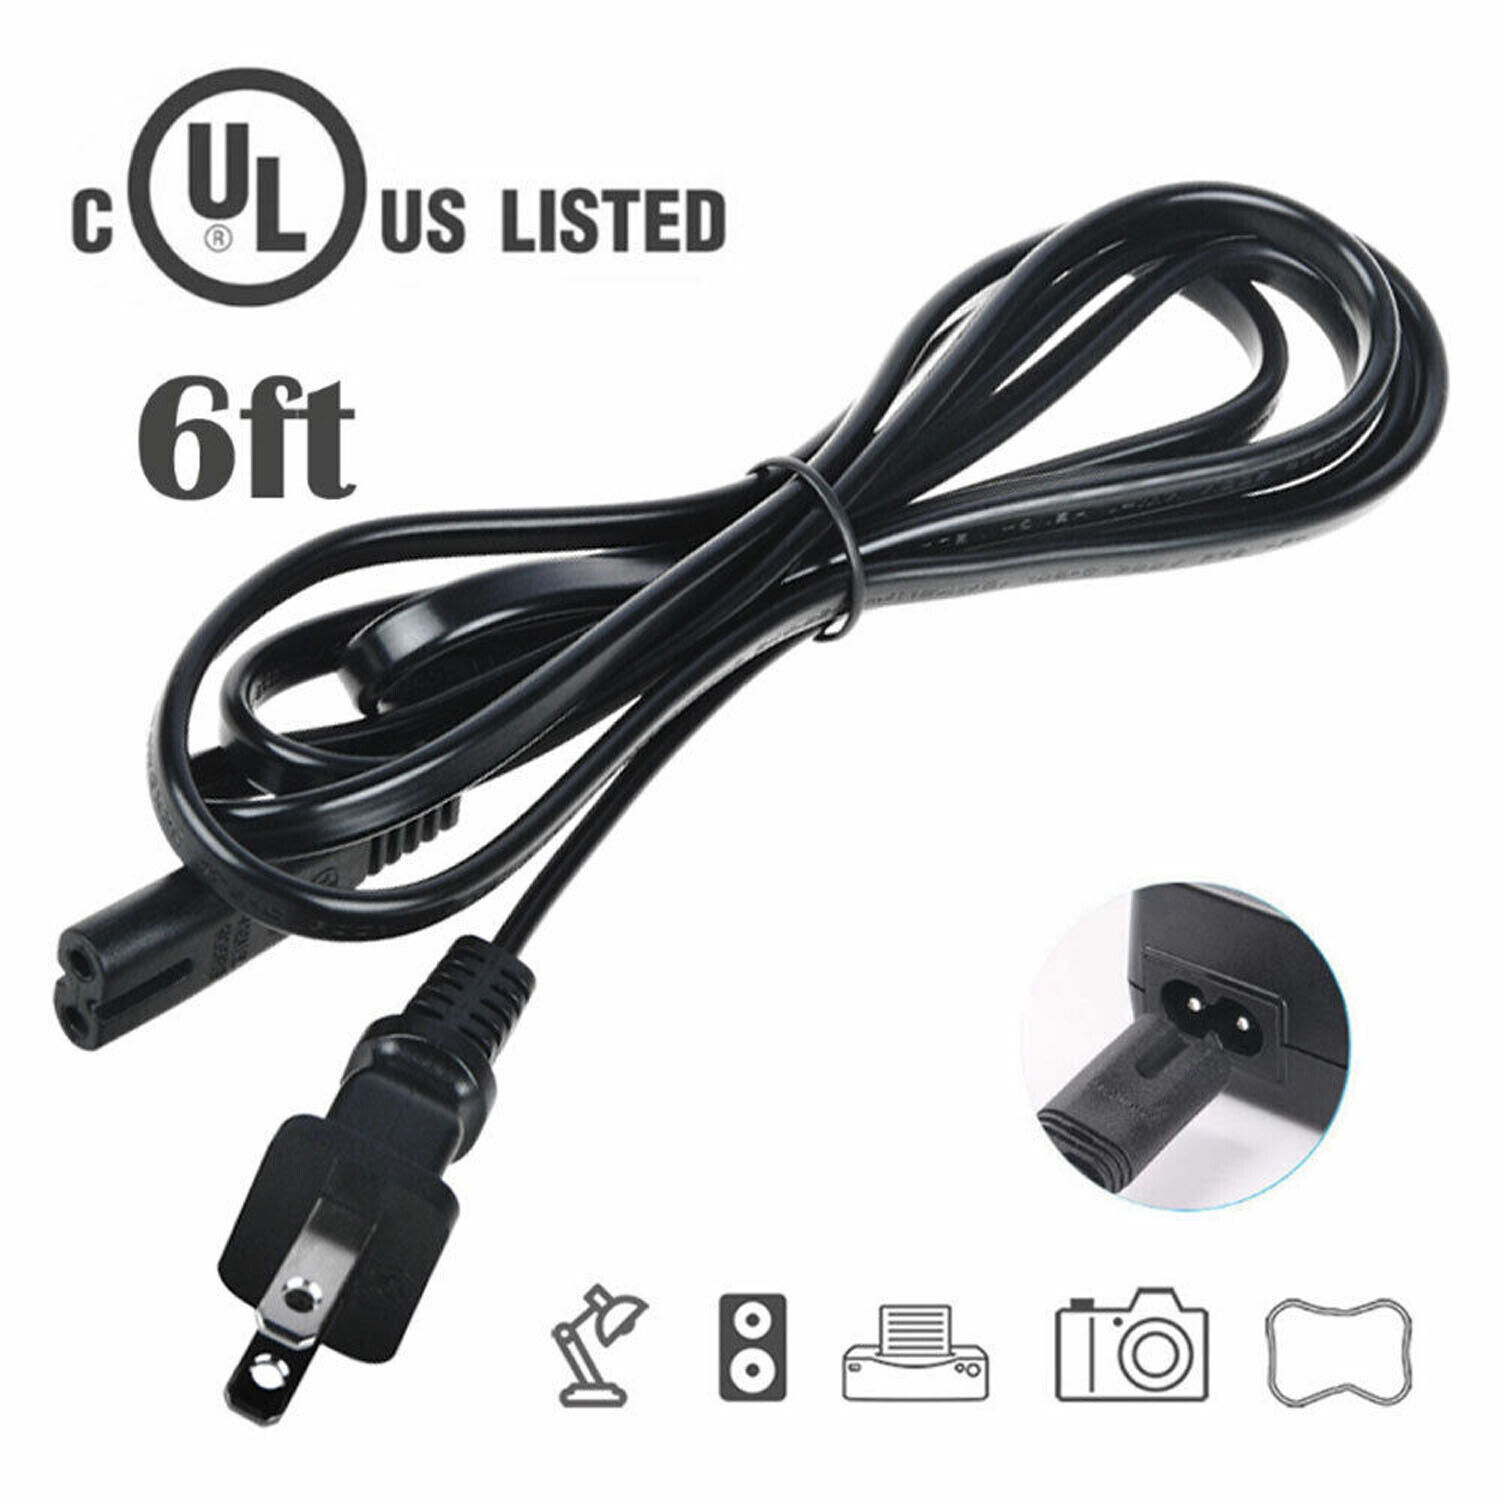 6ft UL Listed AC Power Cord Cable for HP DesignJet T210 24-in Printer(8AG32H) US